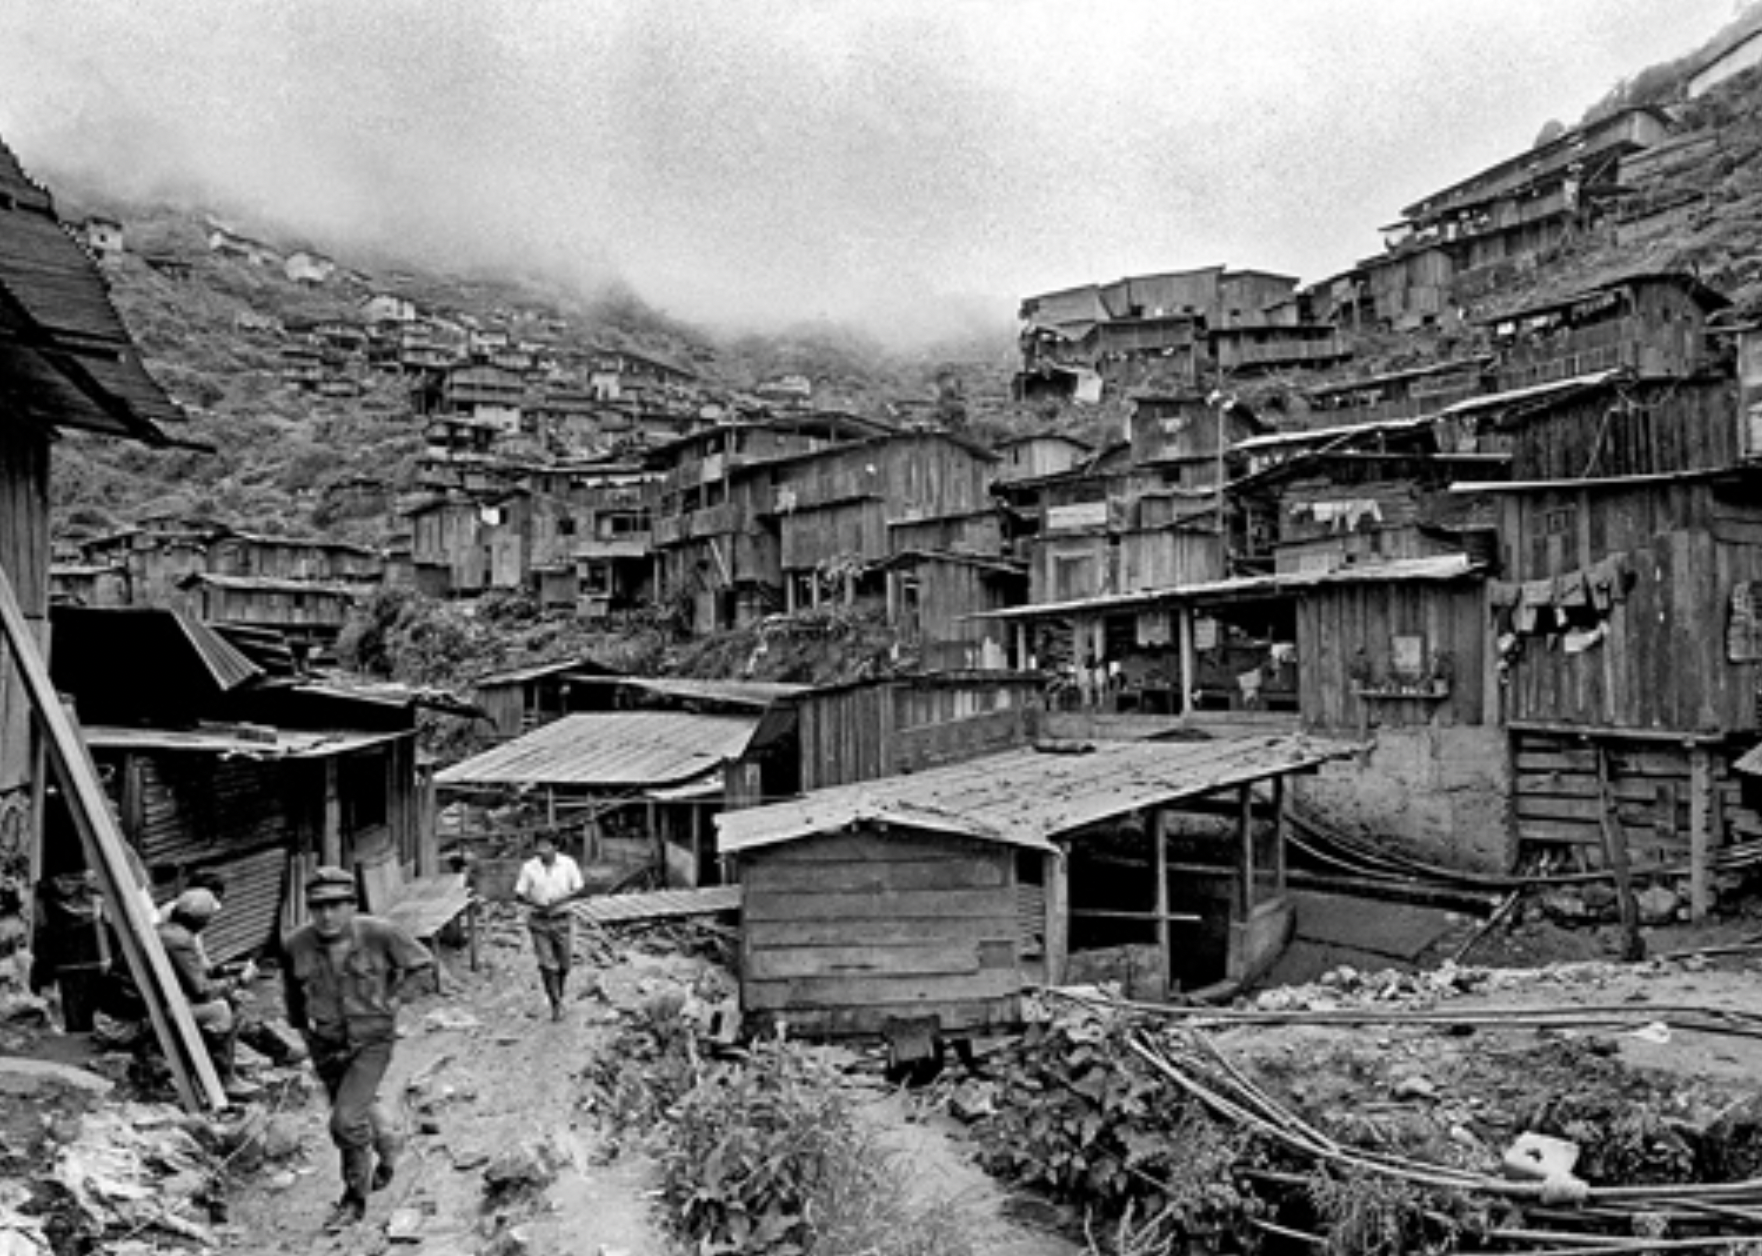 A View of the Gold Mine Village of Nambija.